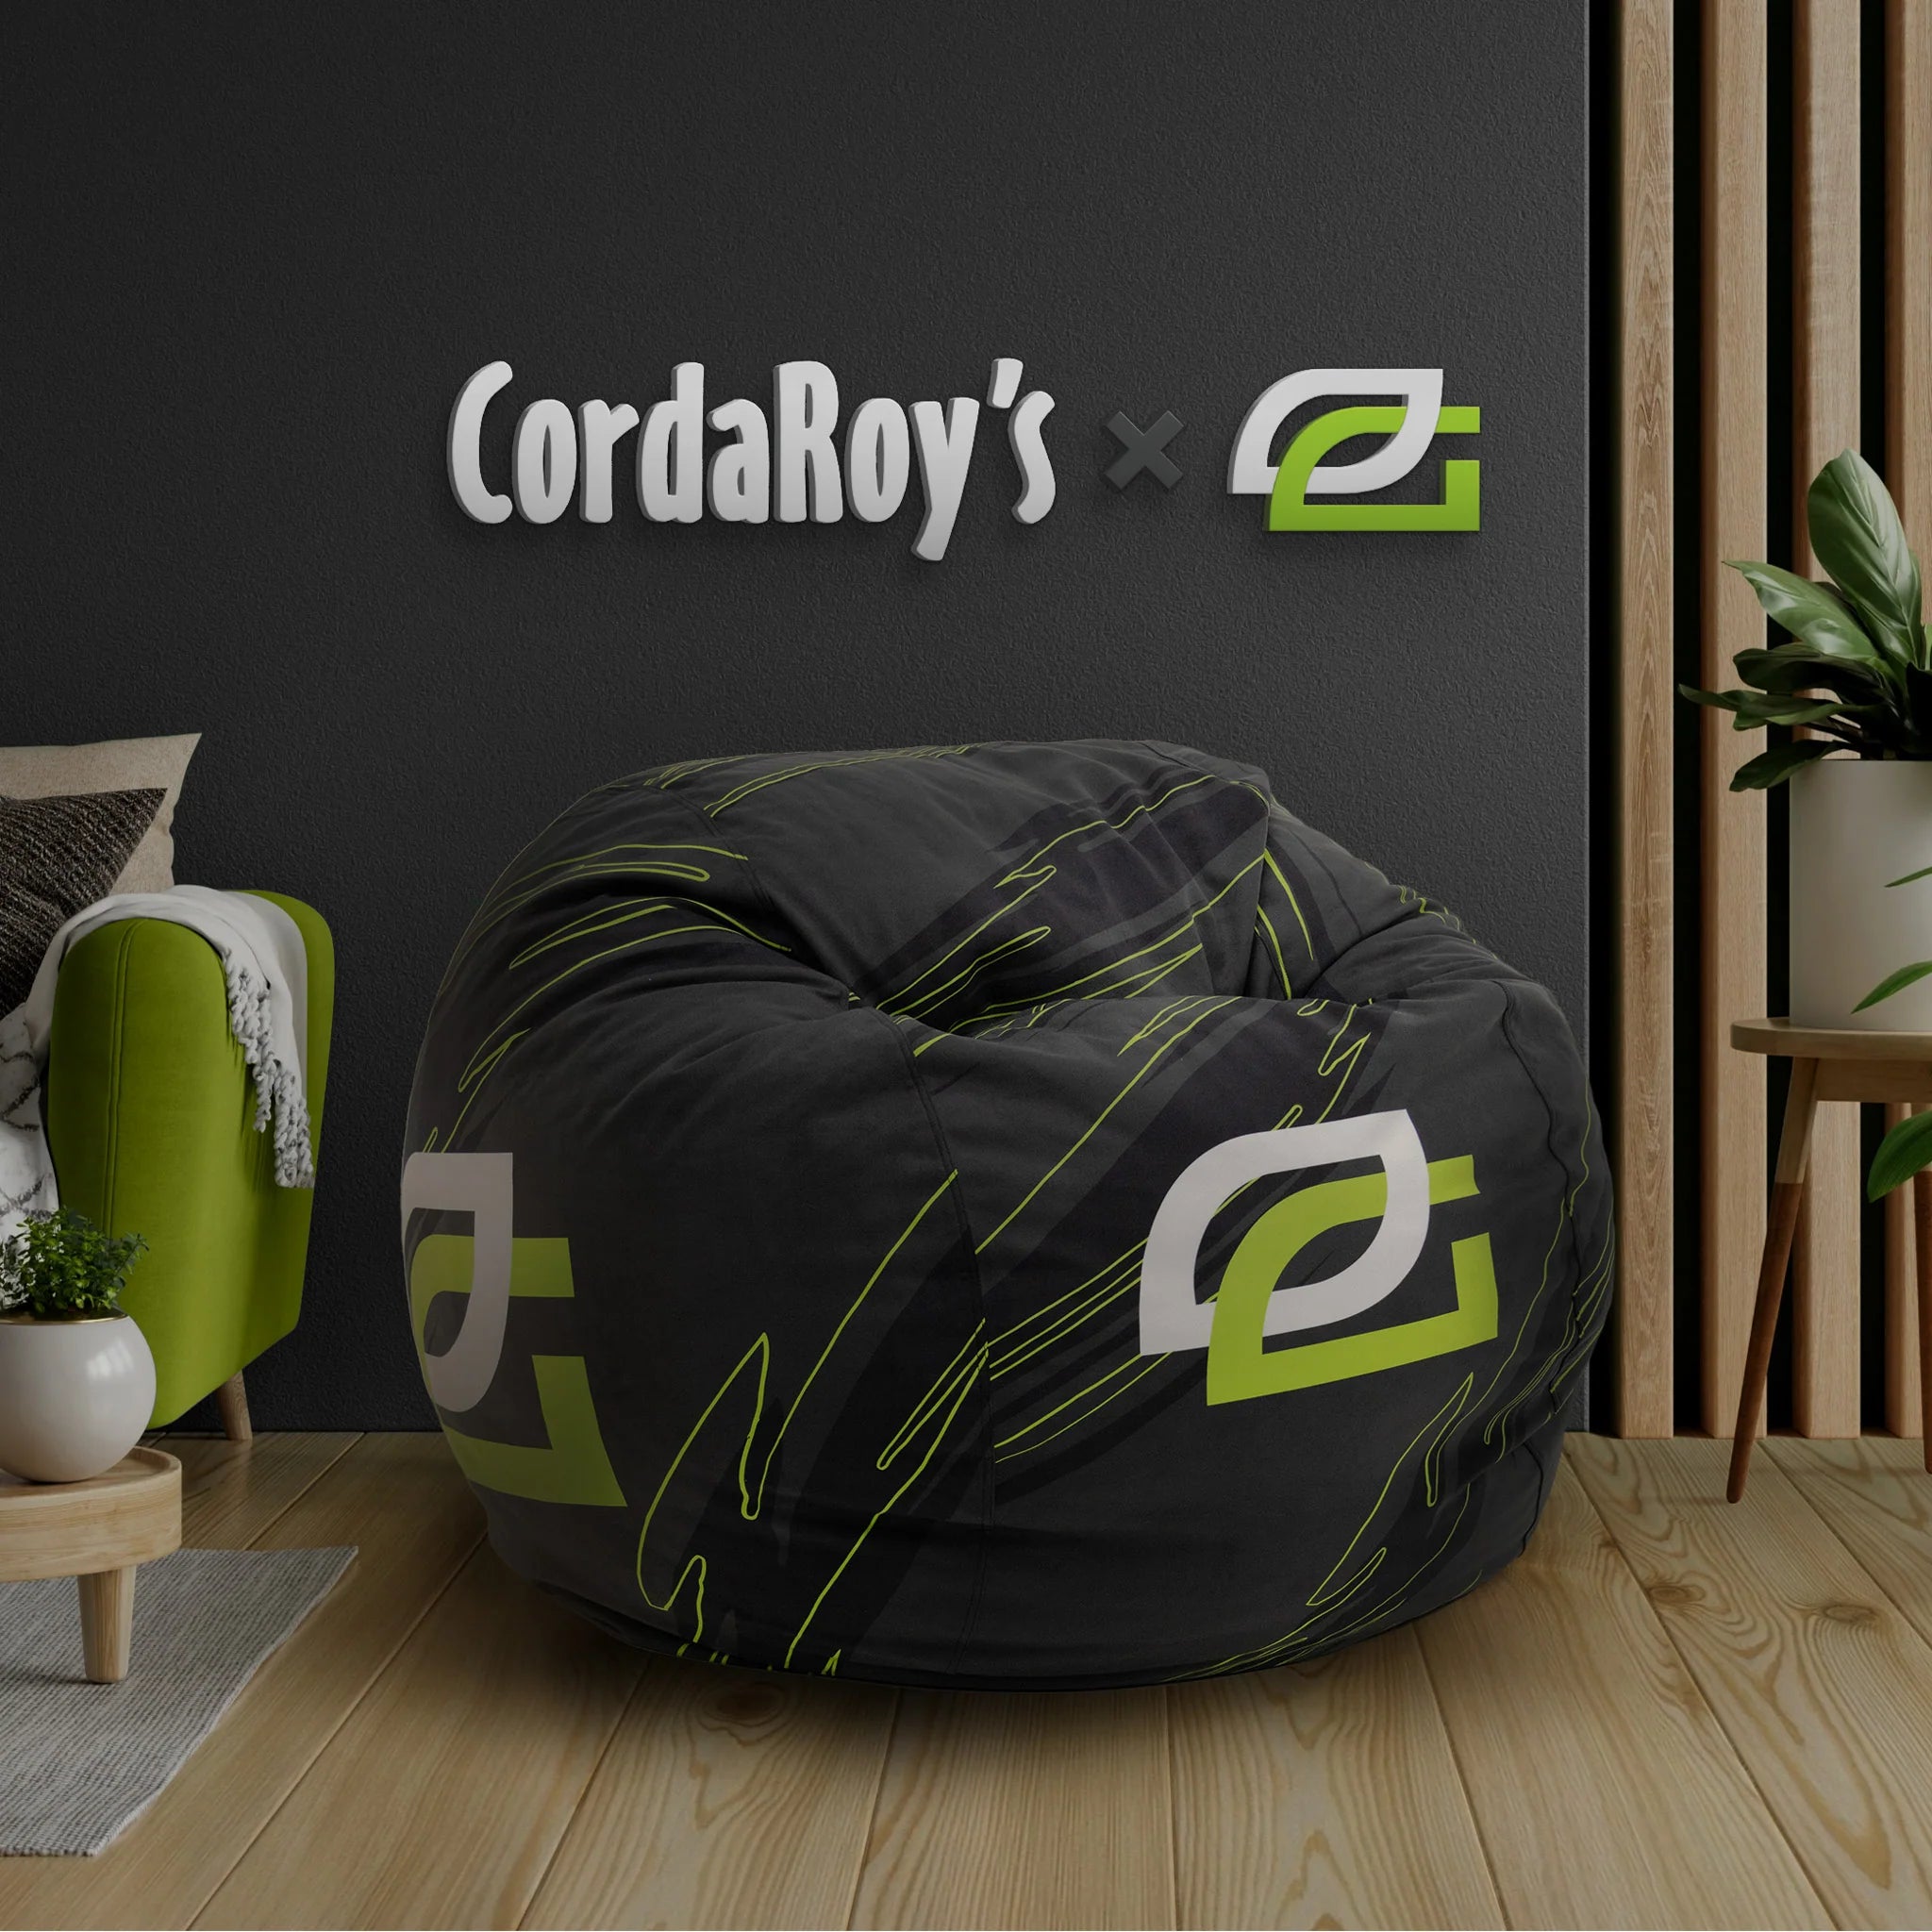 Shark Tank Product CordaRoys is a Bean Bag That Converts to a Bed